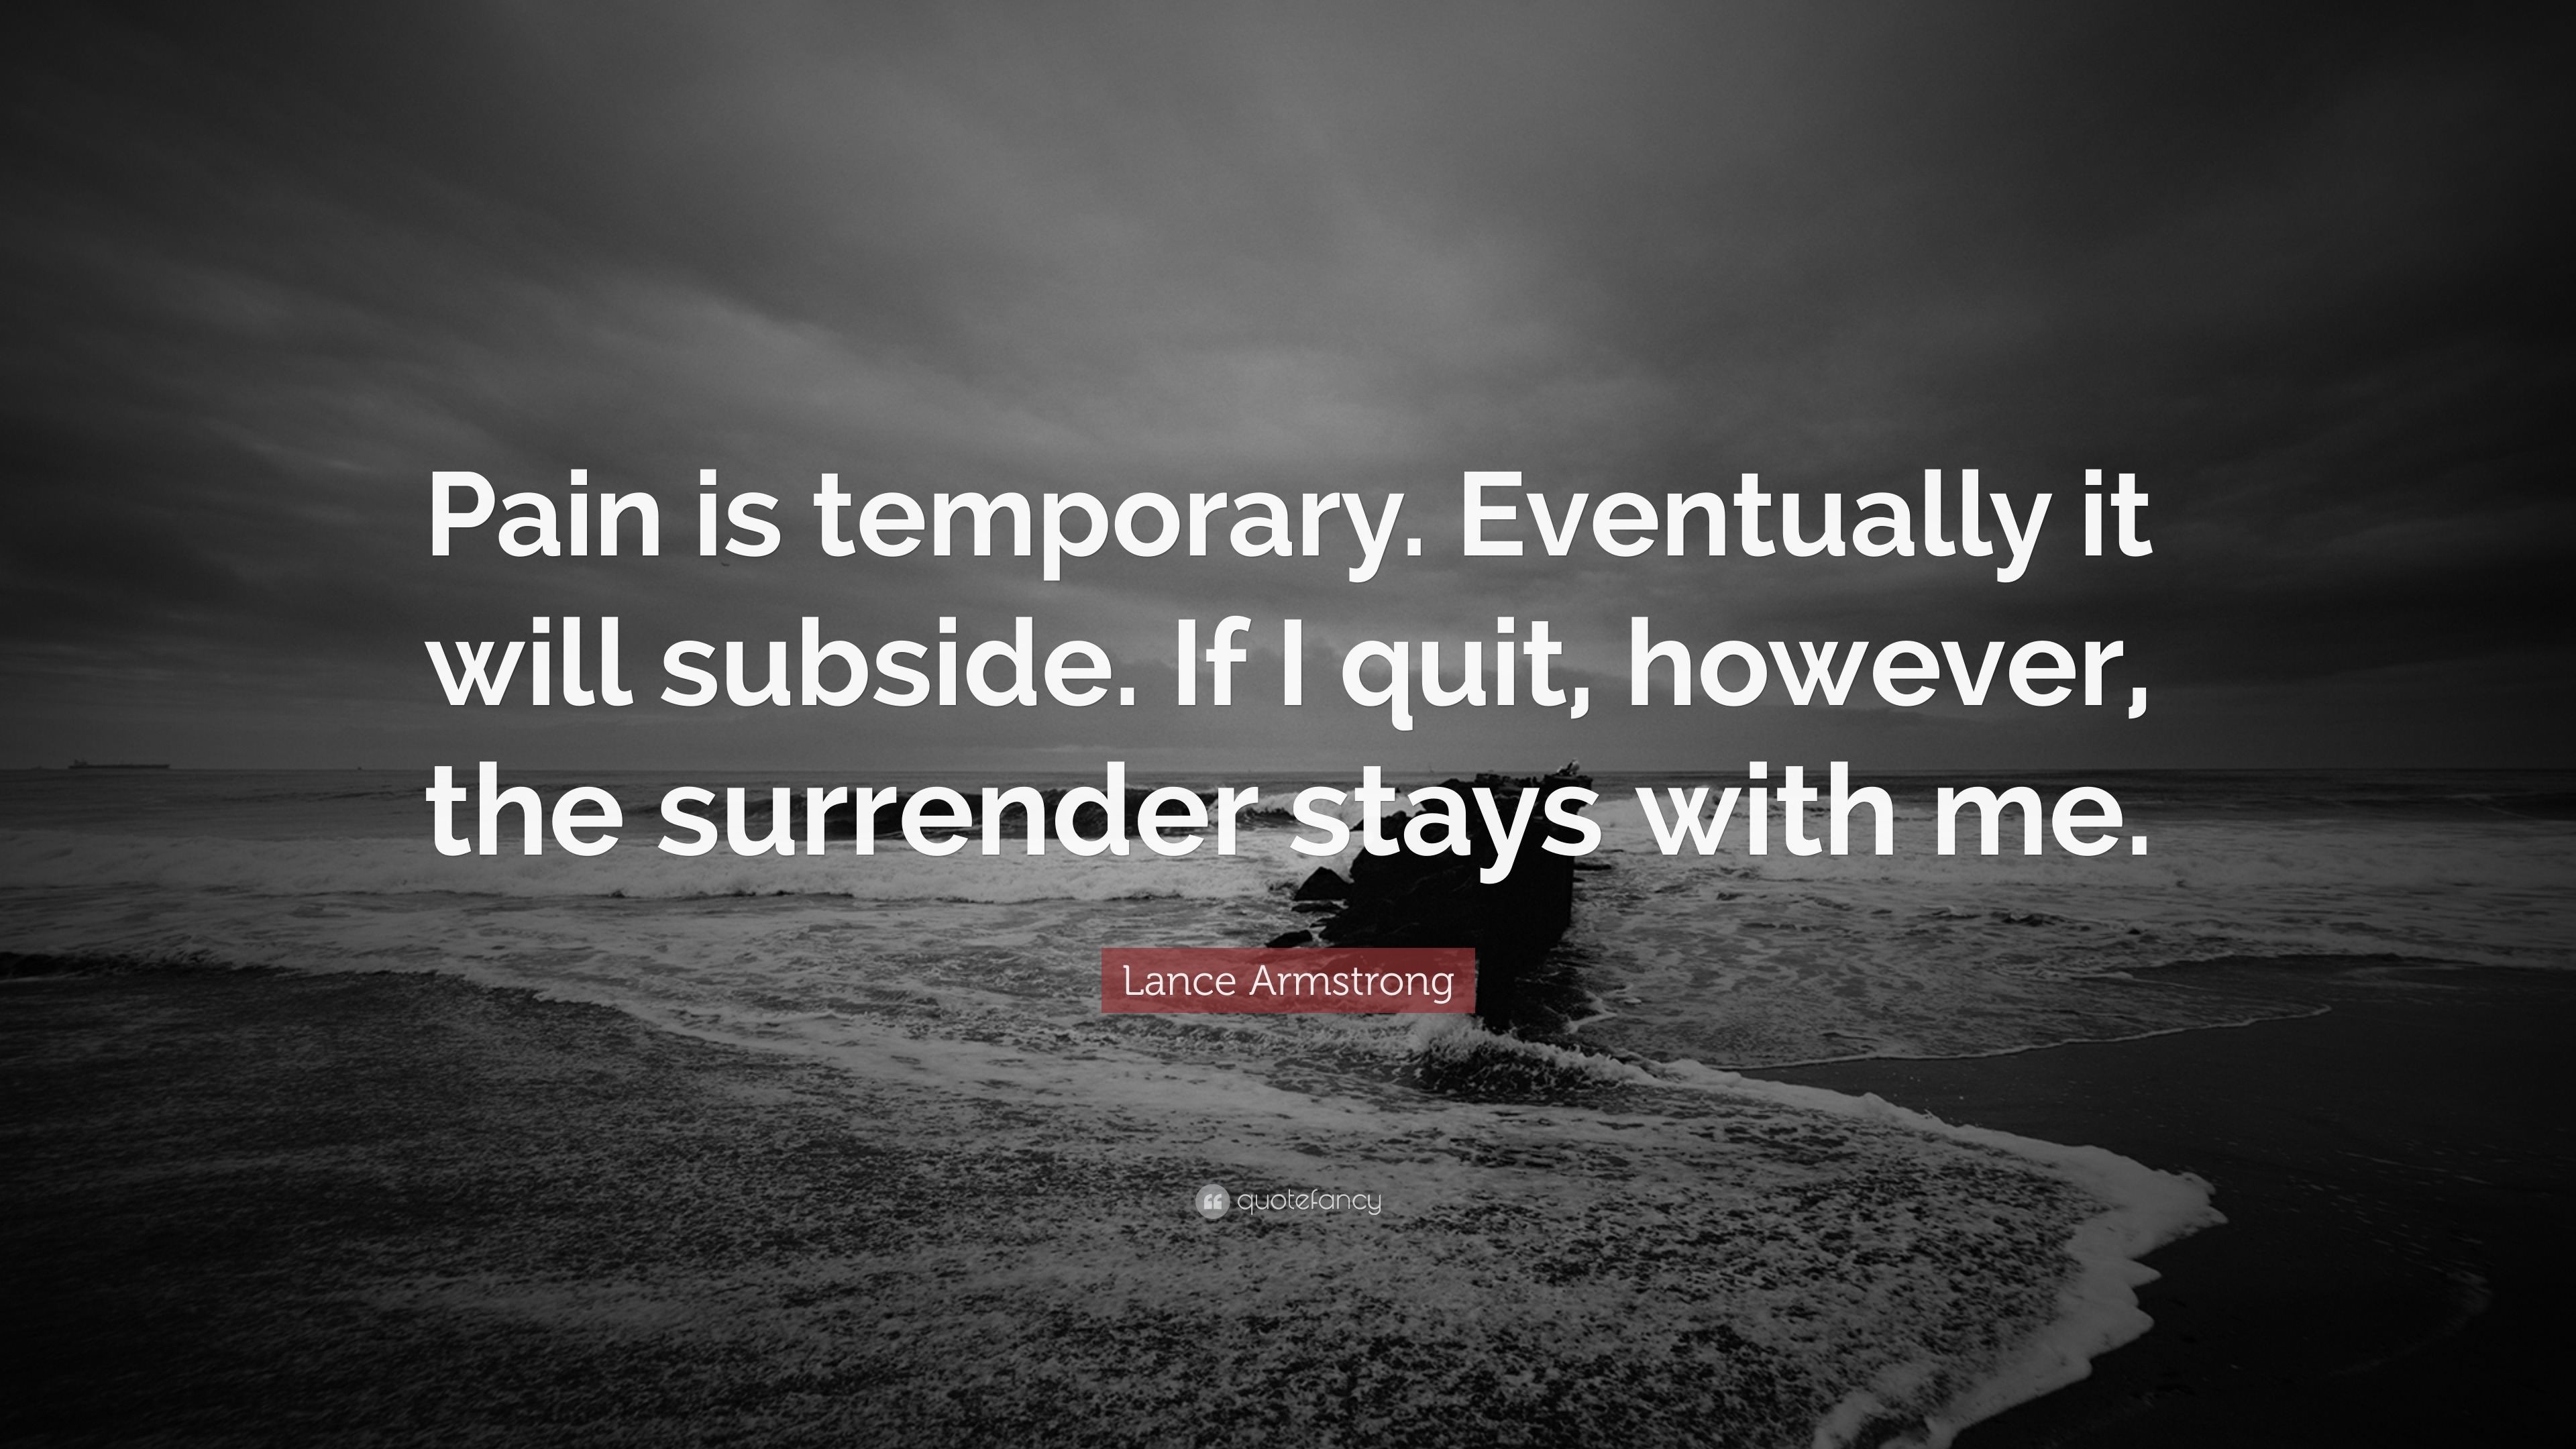 Pain Quotes (40 wallpapers) - Quotefancy